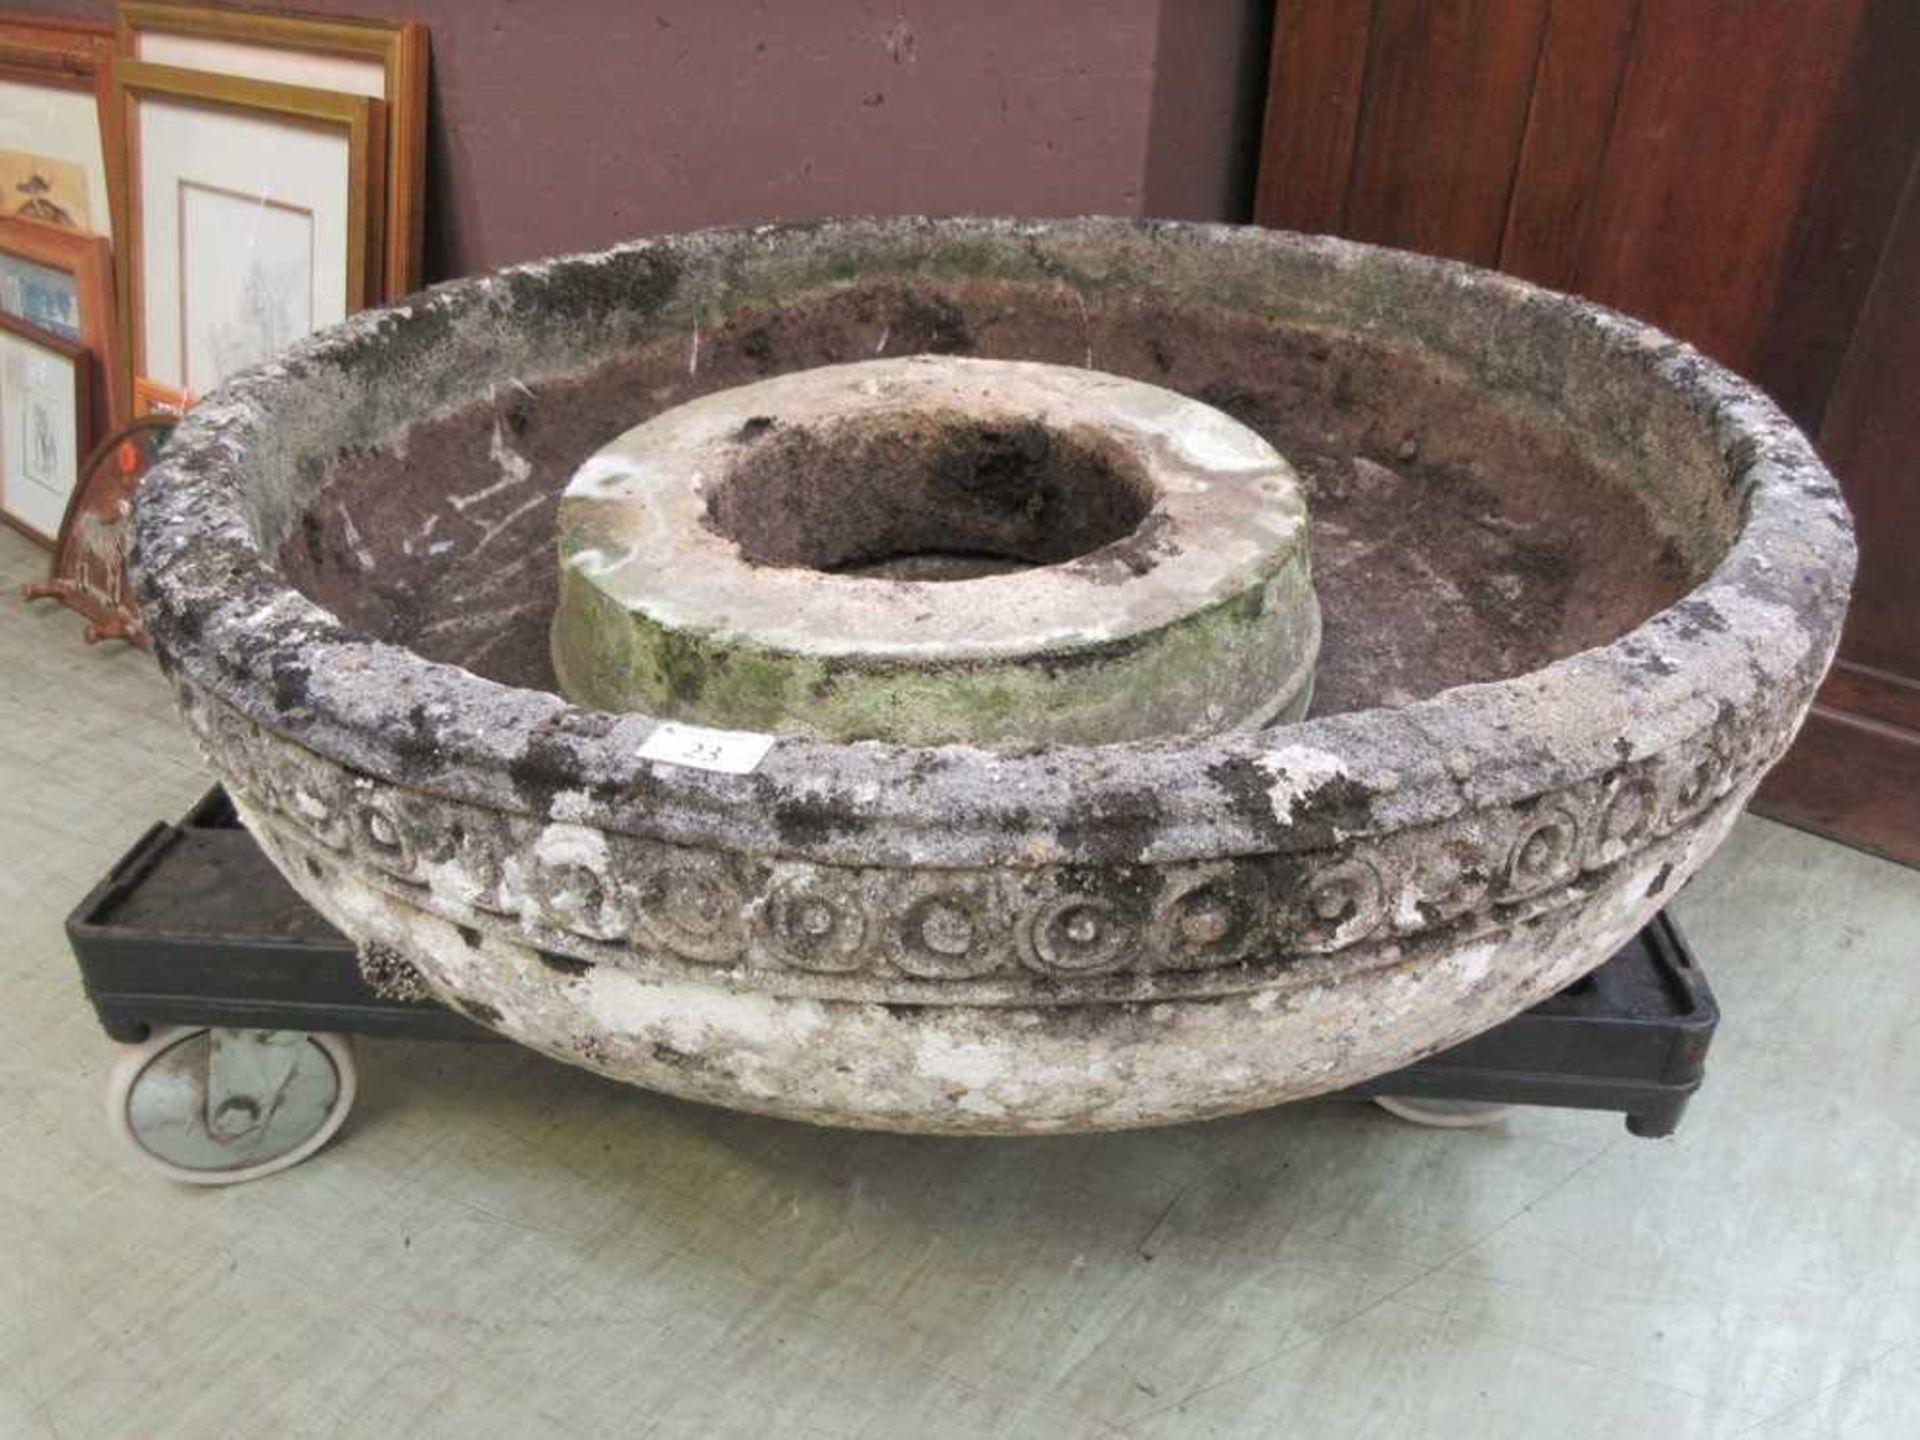 A large composite stone garden basin with decorative banding on sockel